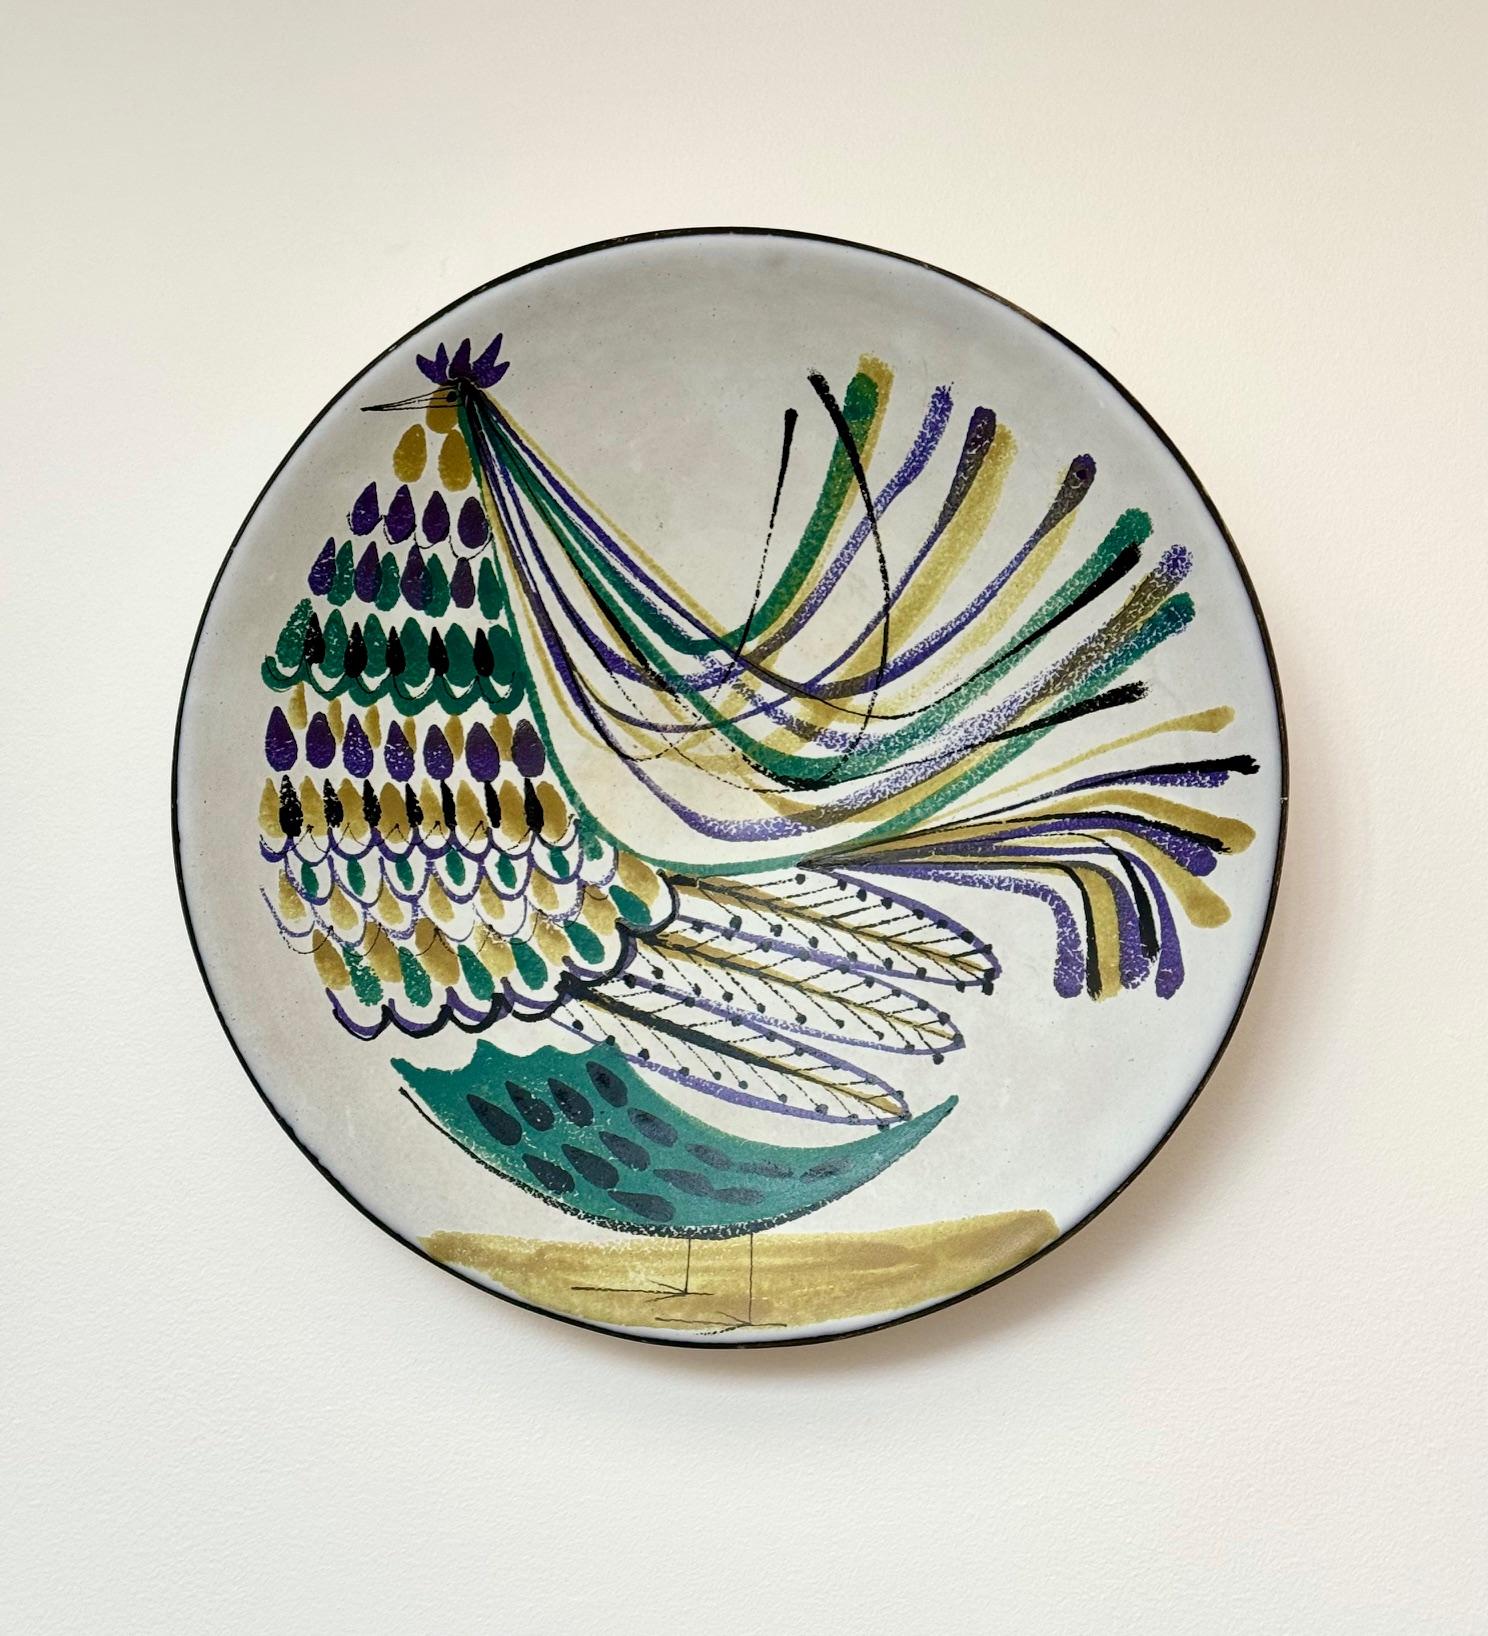 Roger Capron (1922-2006)
Roger Capron studied at Art appliqués of Paris from 1938 to 1943 before teaching drawing in the same establishment from 1945. In 1946, he settled in Vallauris where he created a ceramic workshop.

Large dish, faience tin